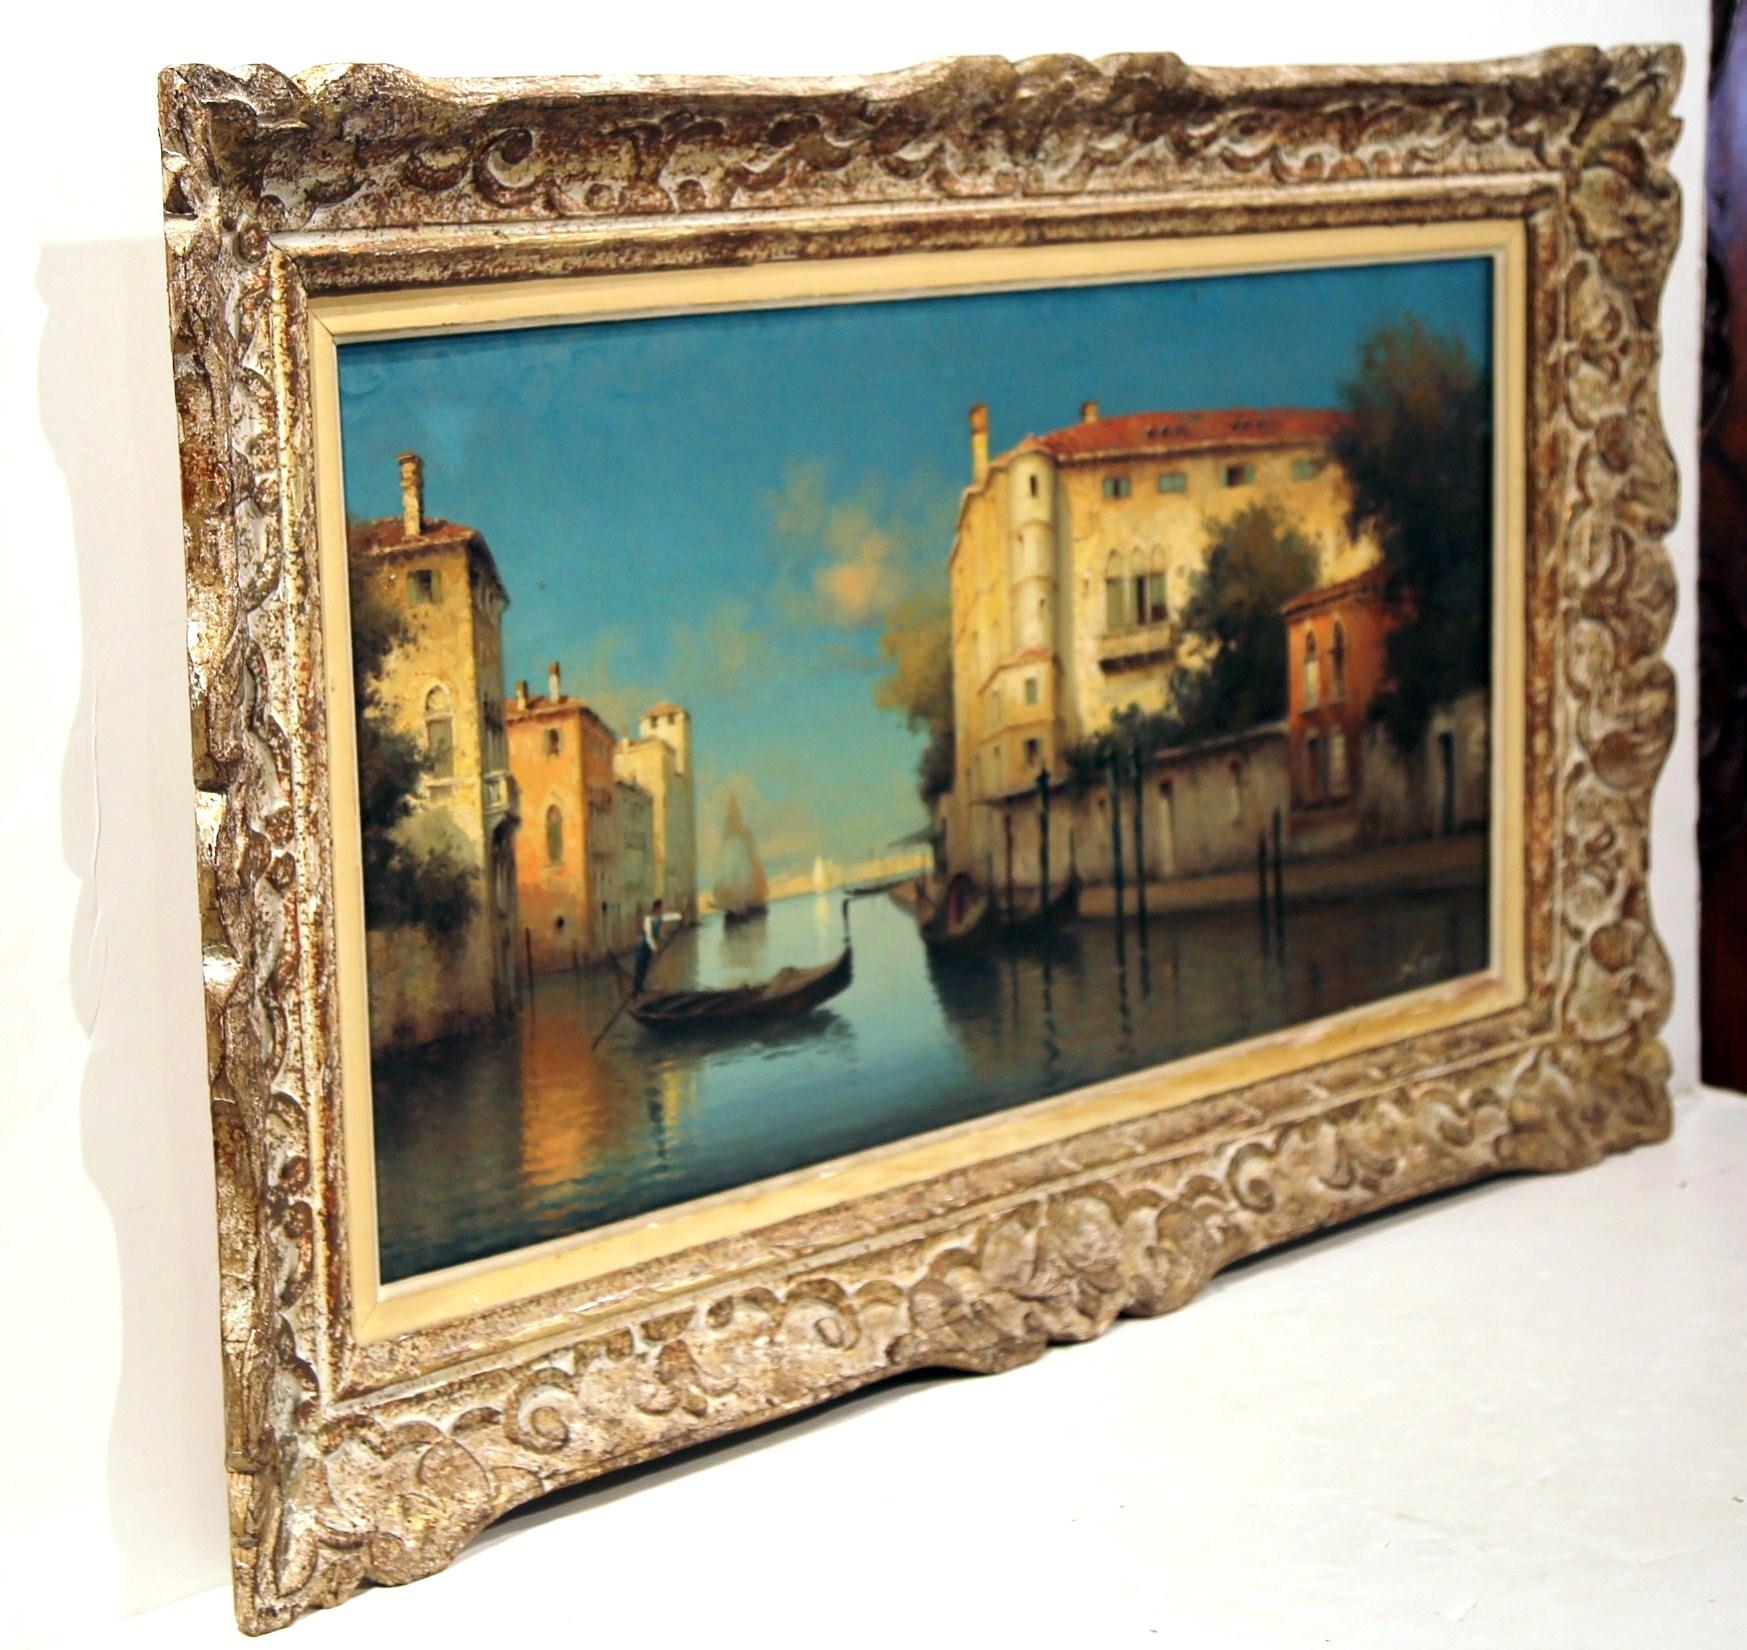 This beautiful antique Venice oil on canvas painting was created in Italy circa 1920. Set in the original carved and painted frame, the art work depicts a sunset on the Venice canal with gondola and Venetian palaces on both sides. Great sunset